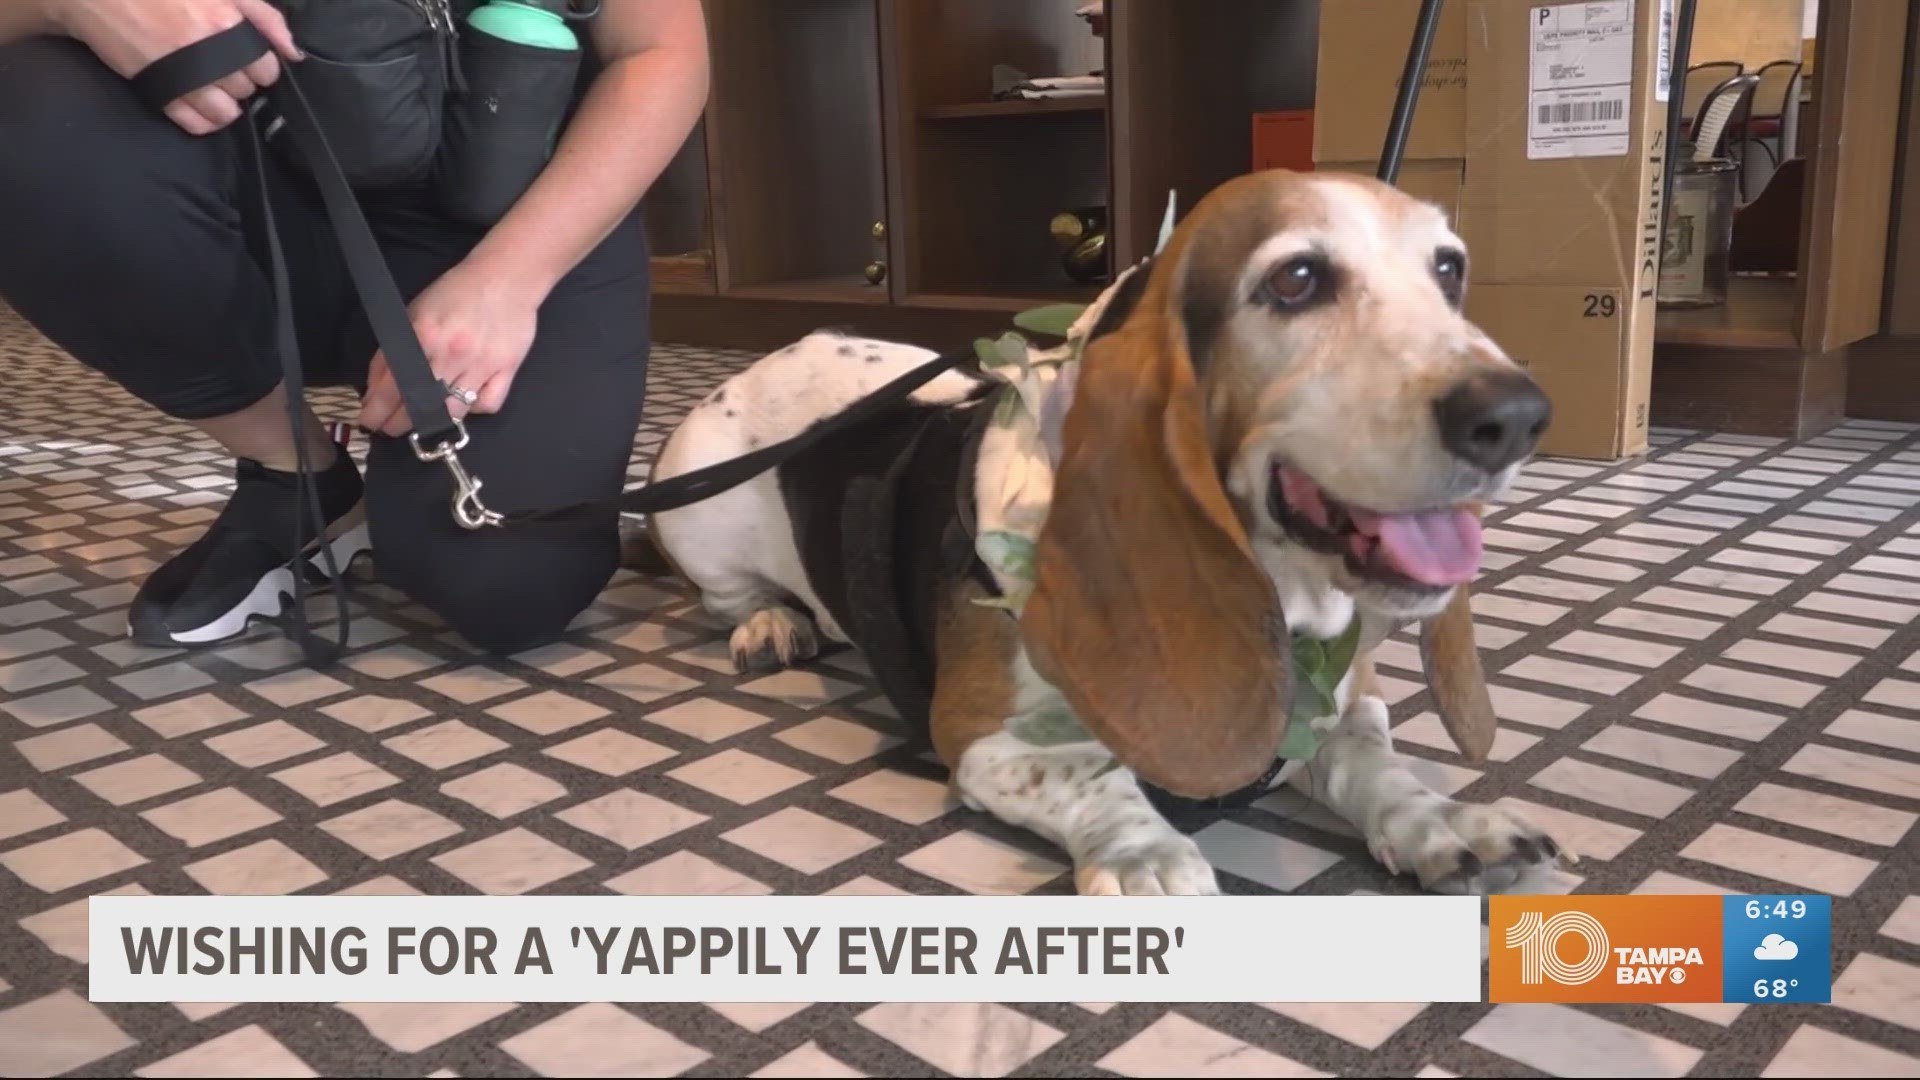 The Tampa-based business provides weddings with adorable guests and it gives sheltered animals a chance to find a forever home.